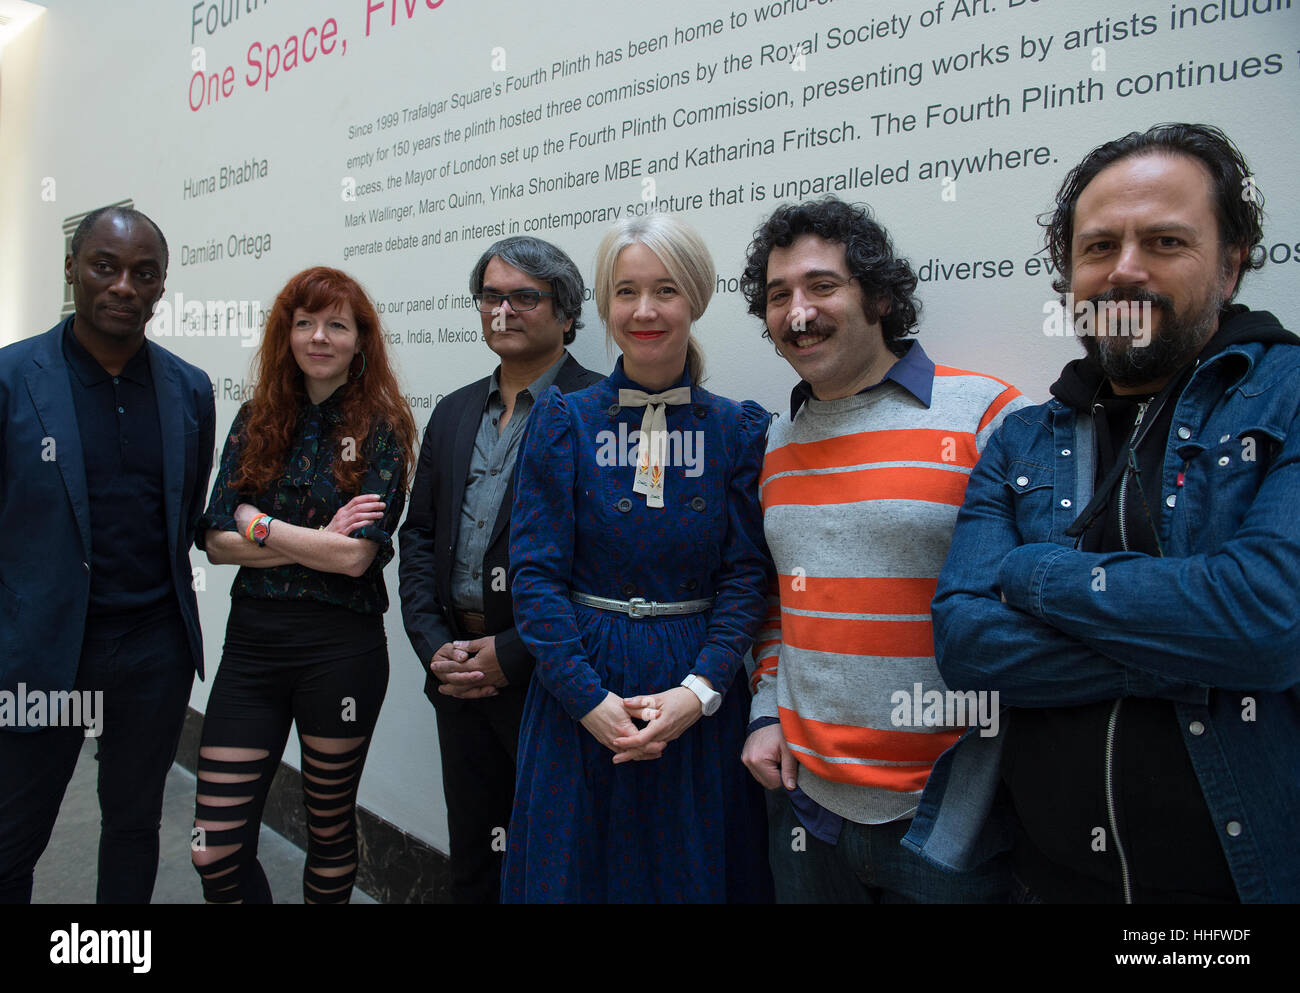 National Gallery, London, UK. 19th January, 2017. Justine Simons (fourth left), Deputy Mayor for Culture and Creative Industries, with Ekow Eshun, Chair of the Fourth Plinth Commissioning Group (left) and artists Heather Phillipson, Shuddhabrata Sengupta of Raqs Media Collective, Michael Rakowitz and Damian Ortega (right), unveils maquette of the five proposals for the next Fourth Plinth commissions with the shortlisted artists attending. The selected artists will be announced in March 2017. Credit: artsimages/Alamy Live News Stock Photo